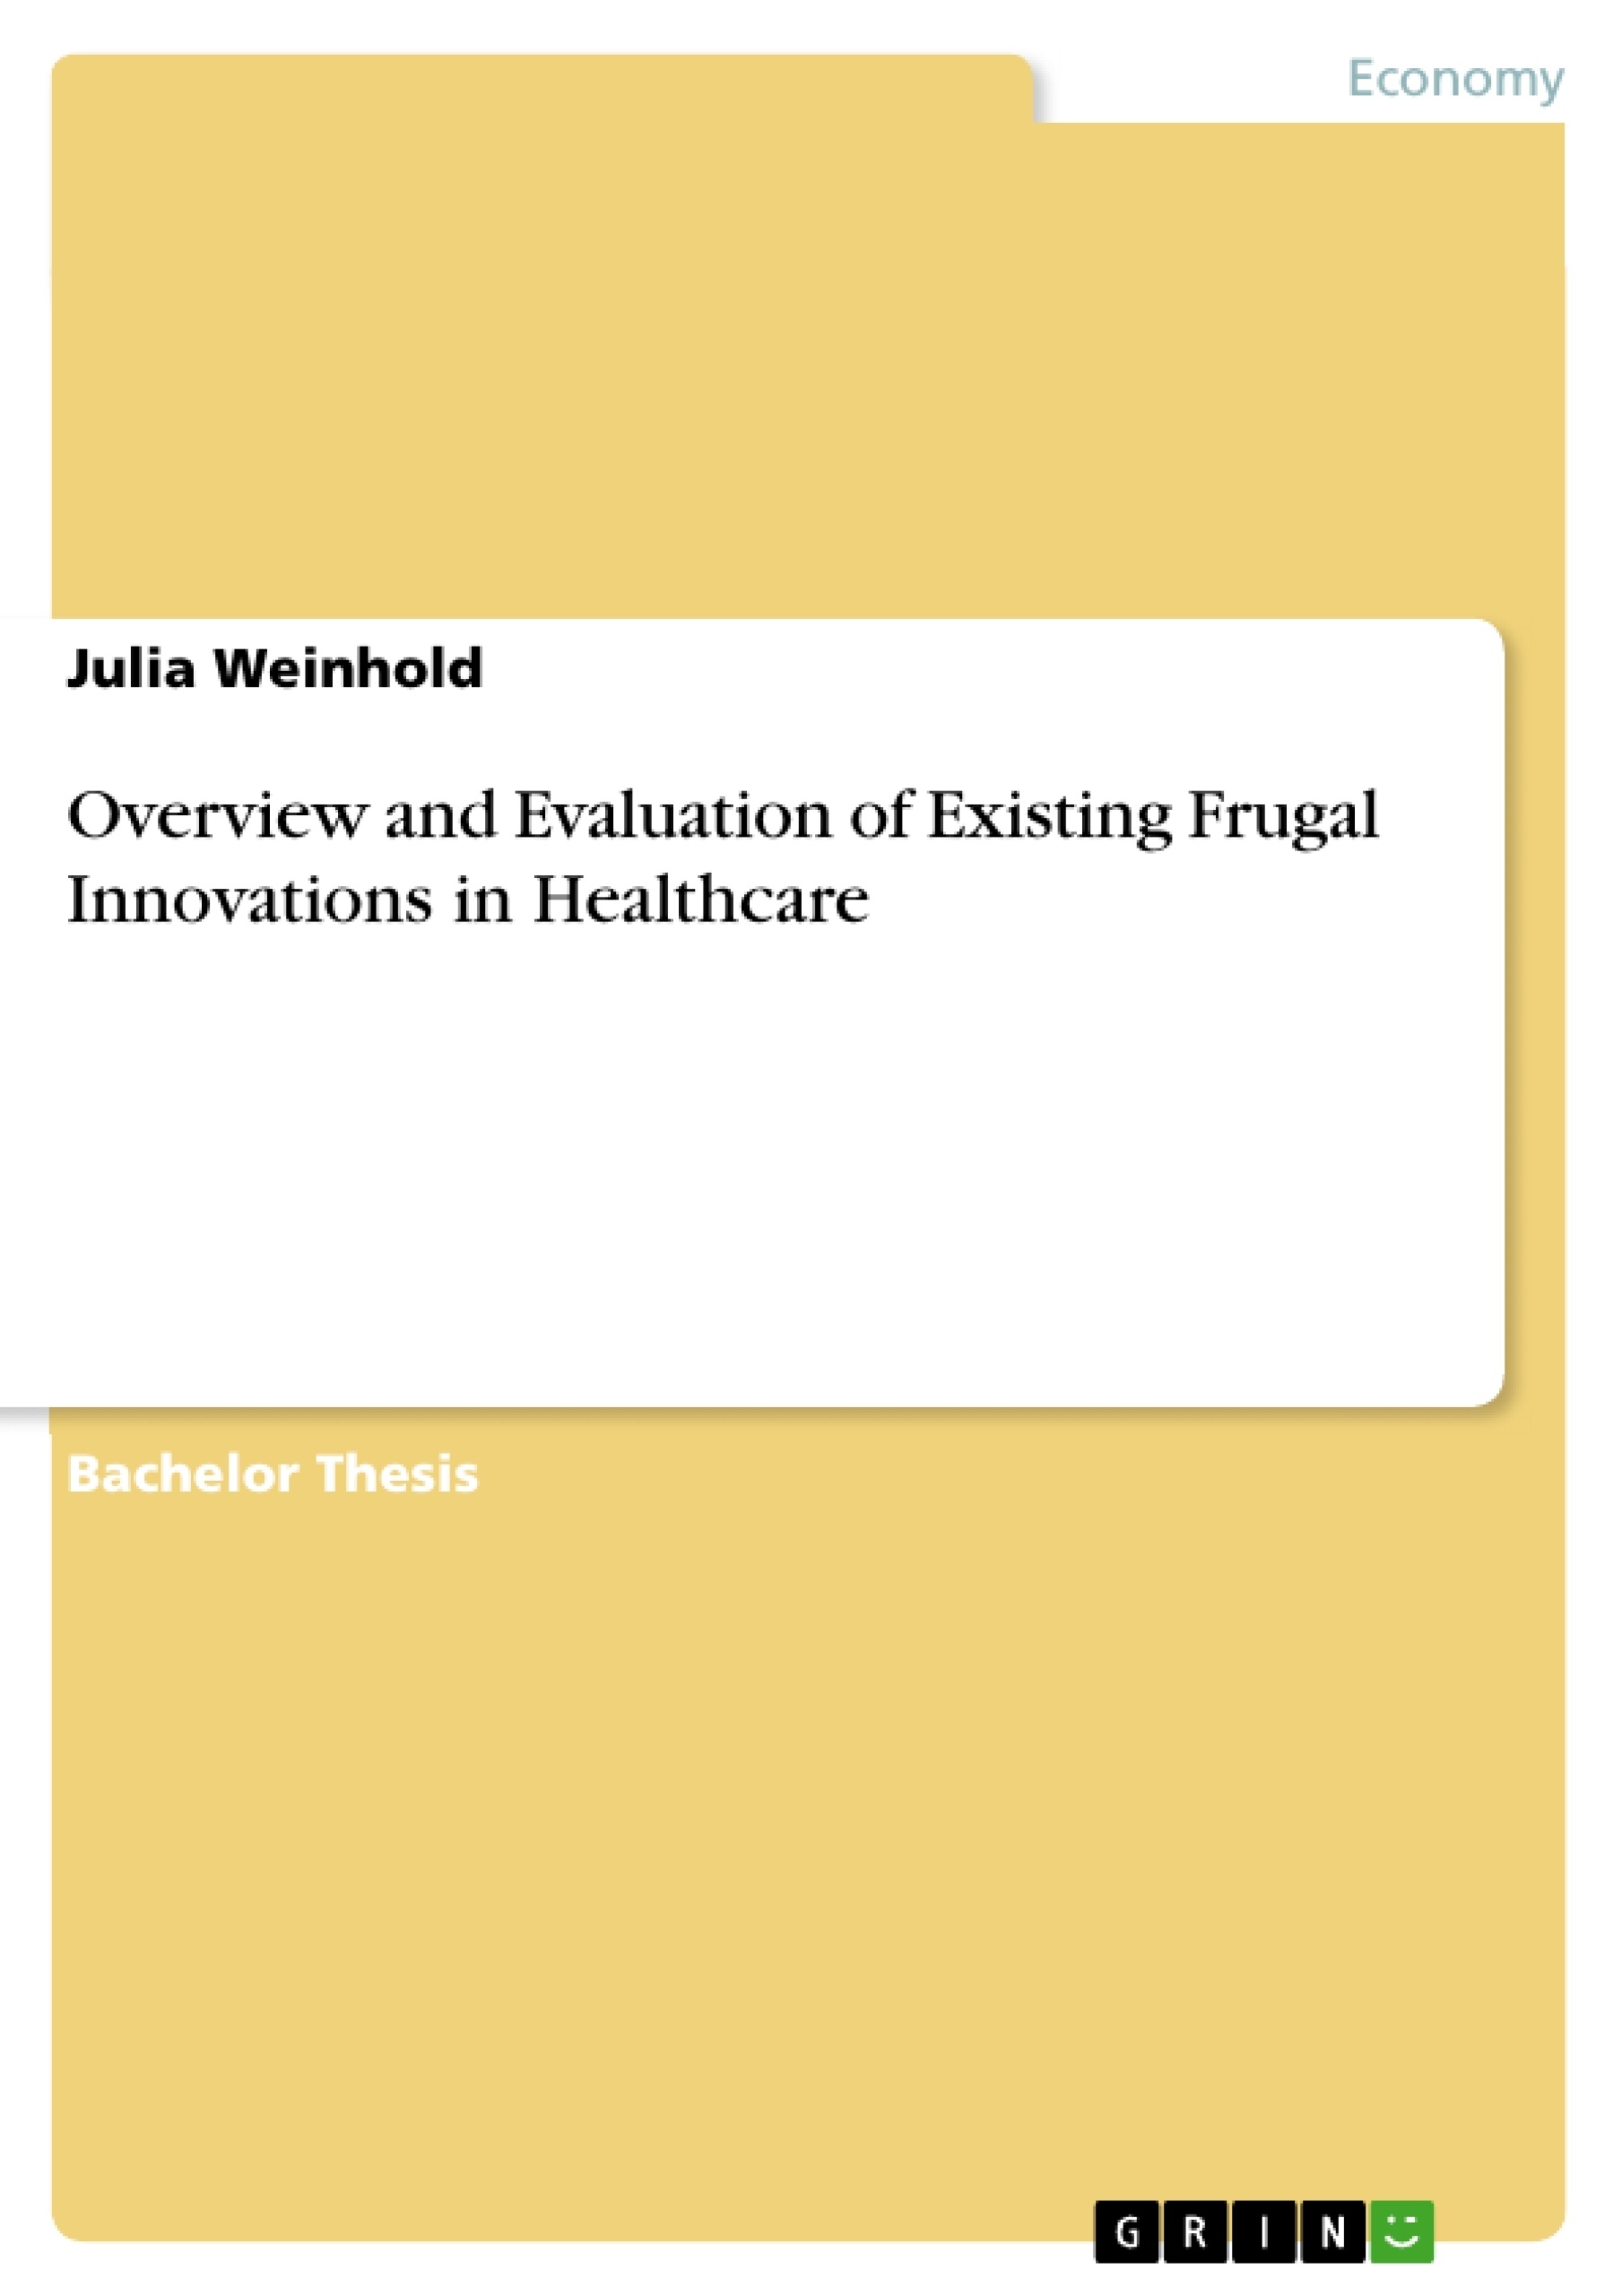 Titre: Overview and Evaluation of Existing Frugal Innovations in Healthcare